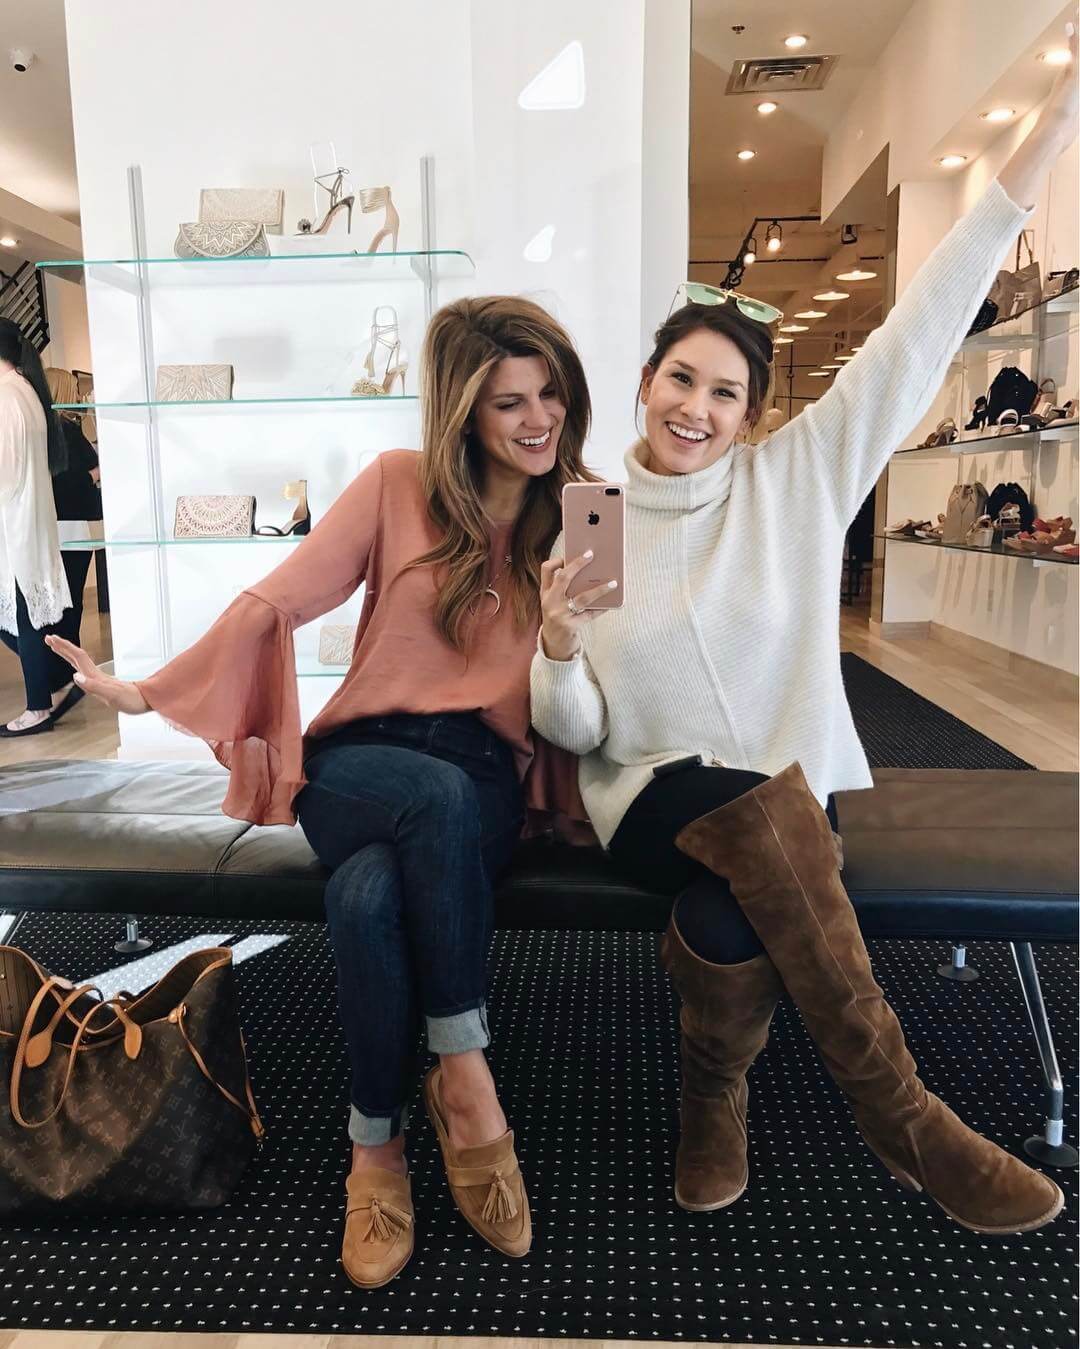 Brighton and Lisel shopping wearing flare top with jeans and tan mules